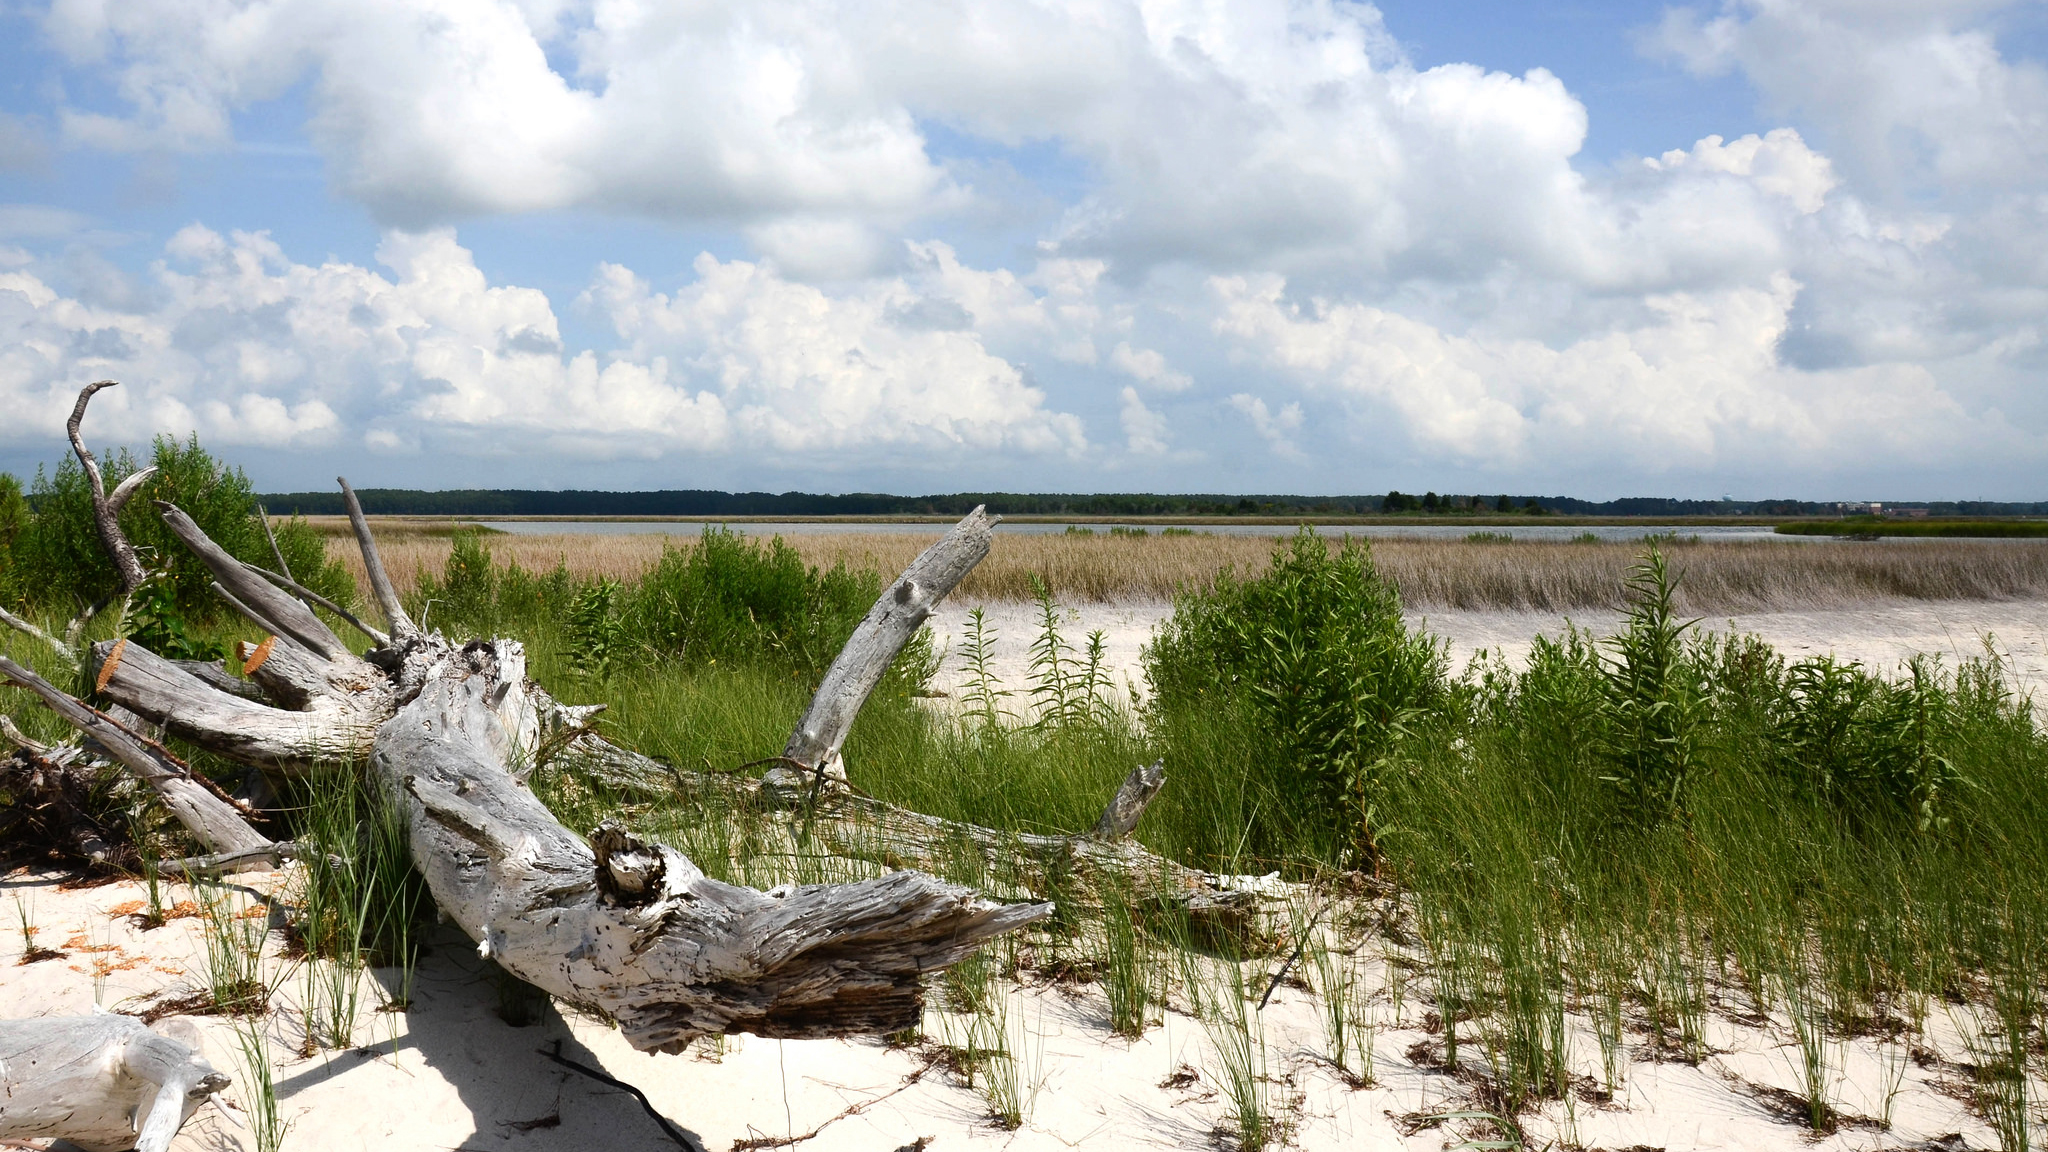 Janes Island lies in the Chesapeake Bay near Maryland's Eastern Shore, and is Maryland state park featuring a salt marsh, water trails for canoeing, and isolated pristine beaches. Photo by Tim Brown / Flickr through a Creative Commons license